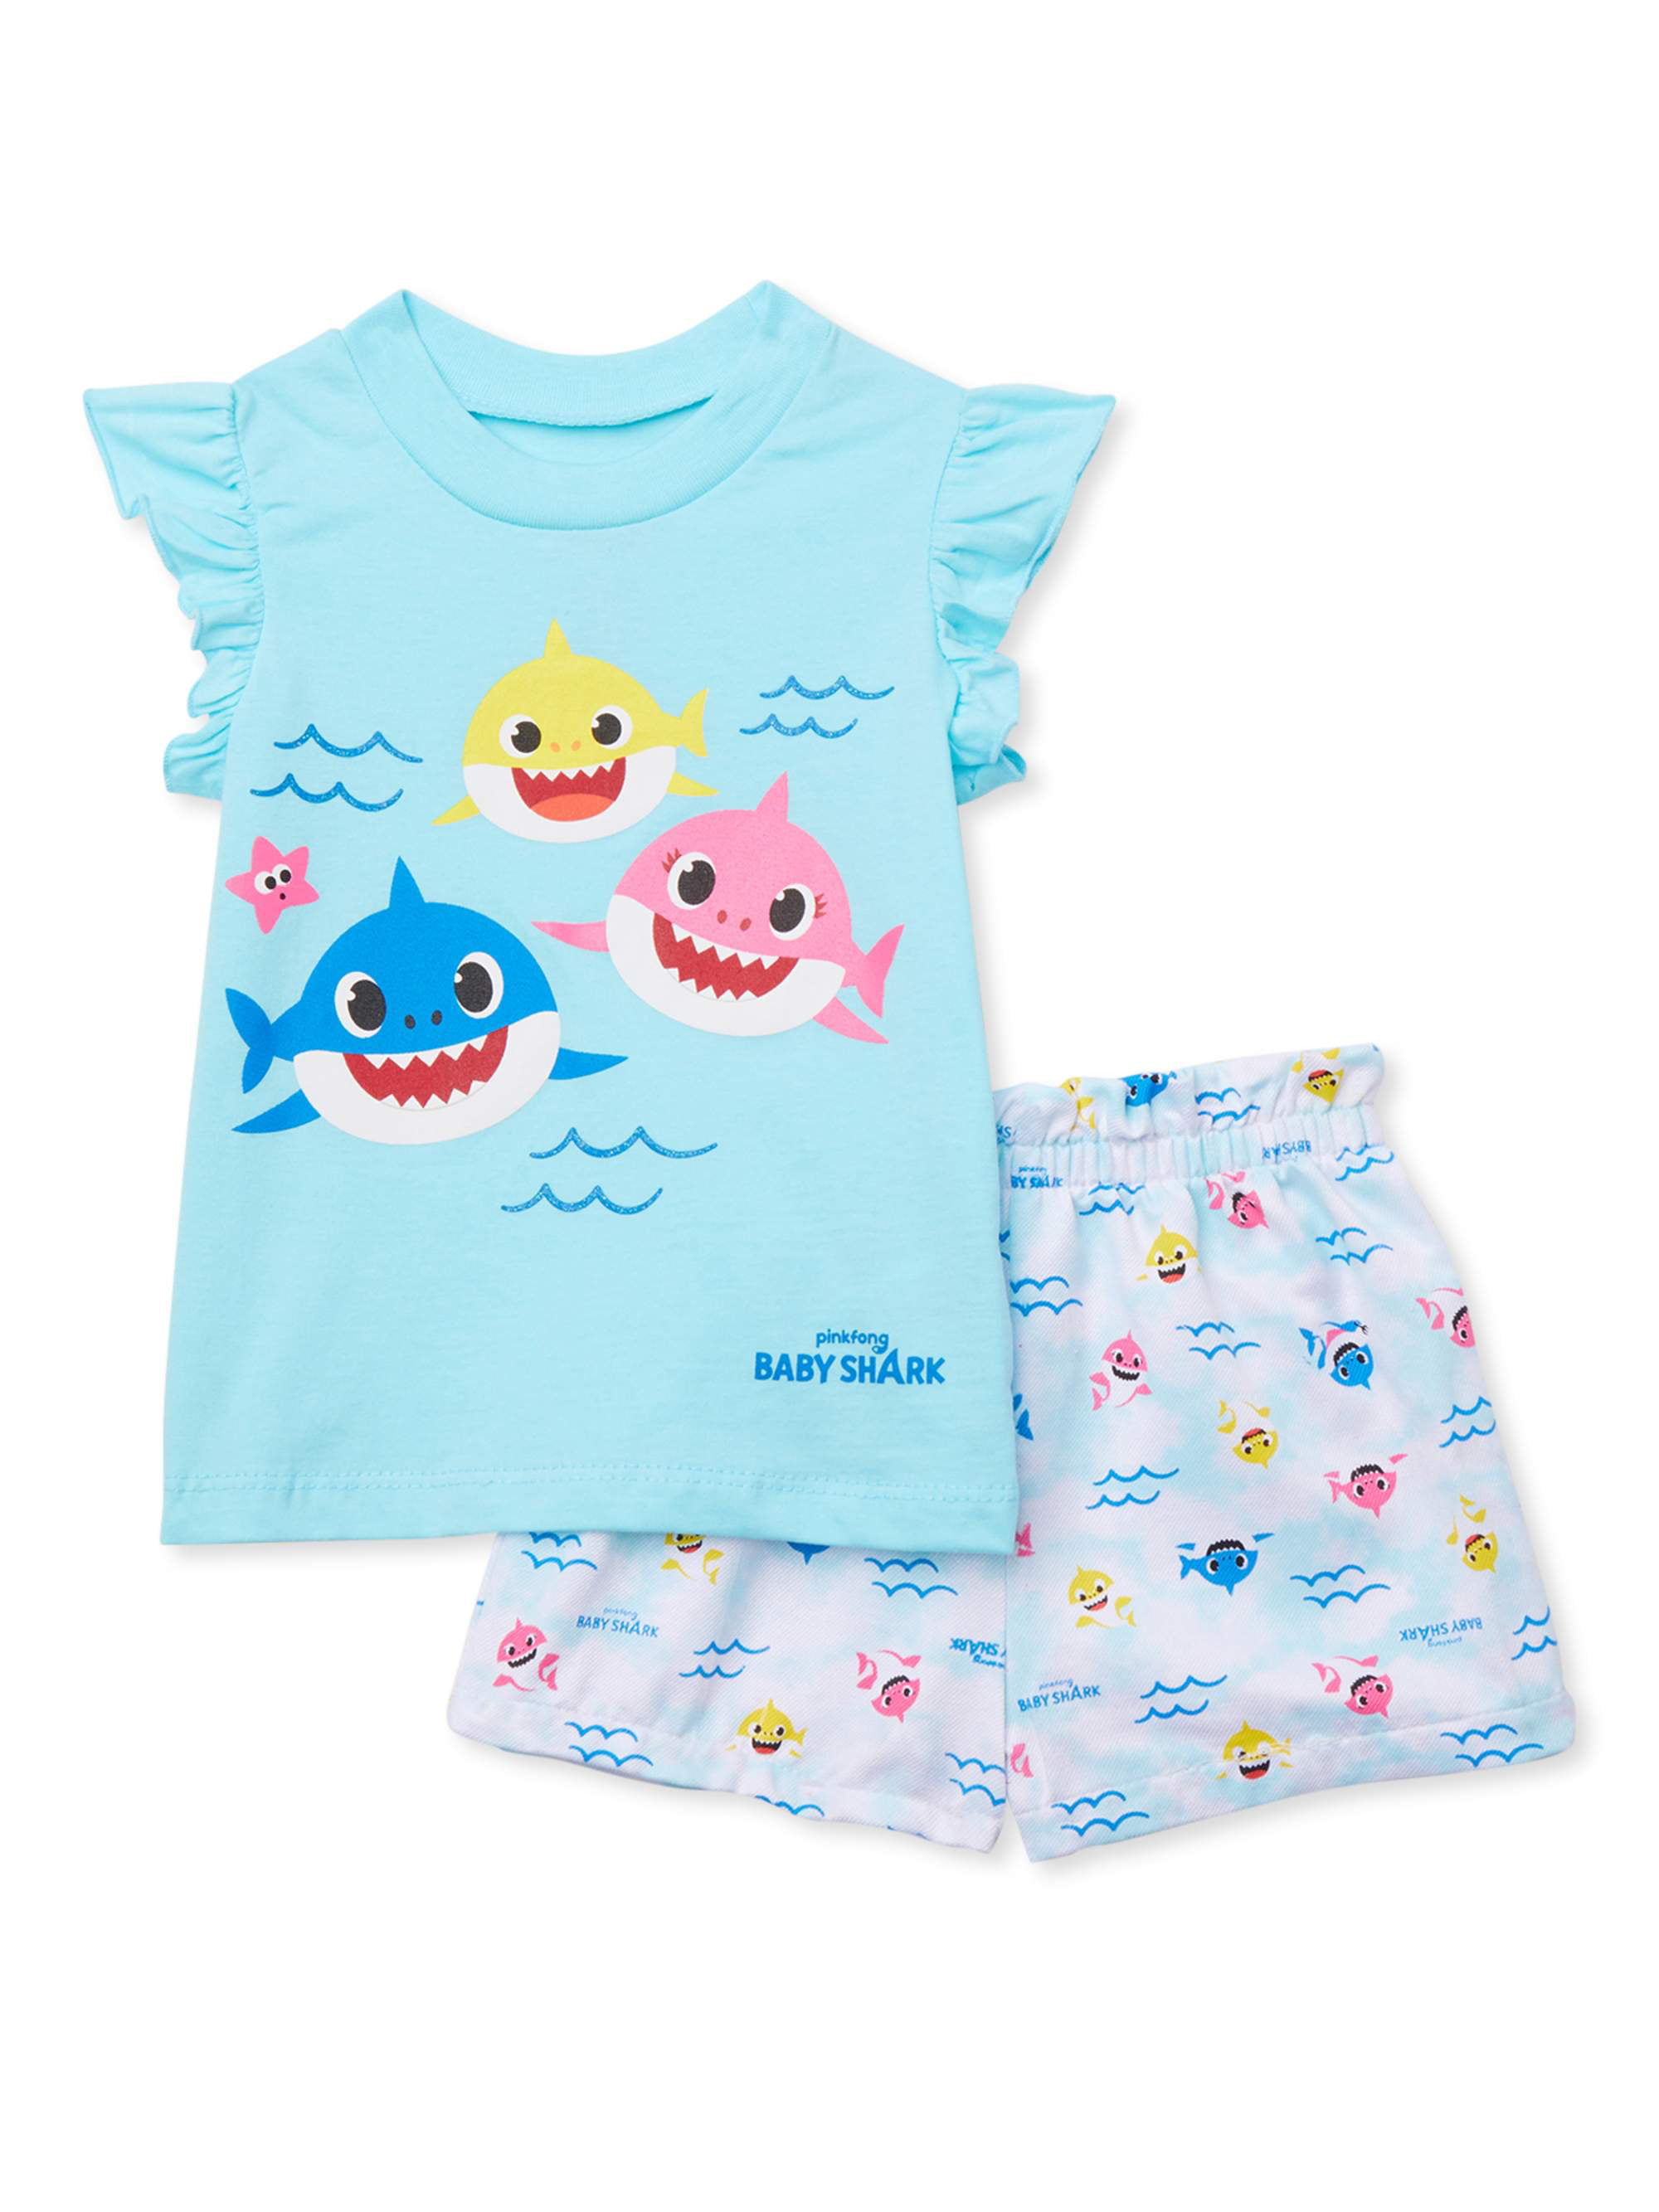 baby shark girl outfit